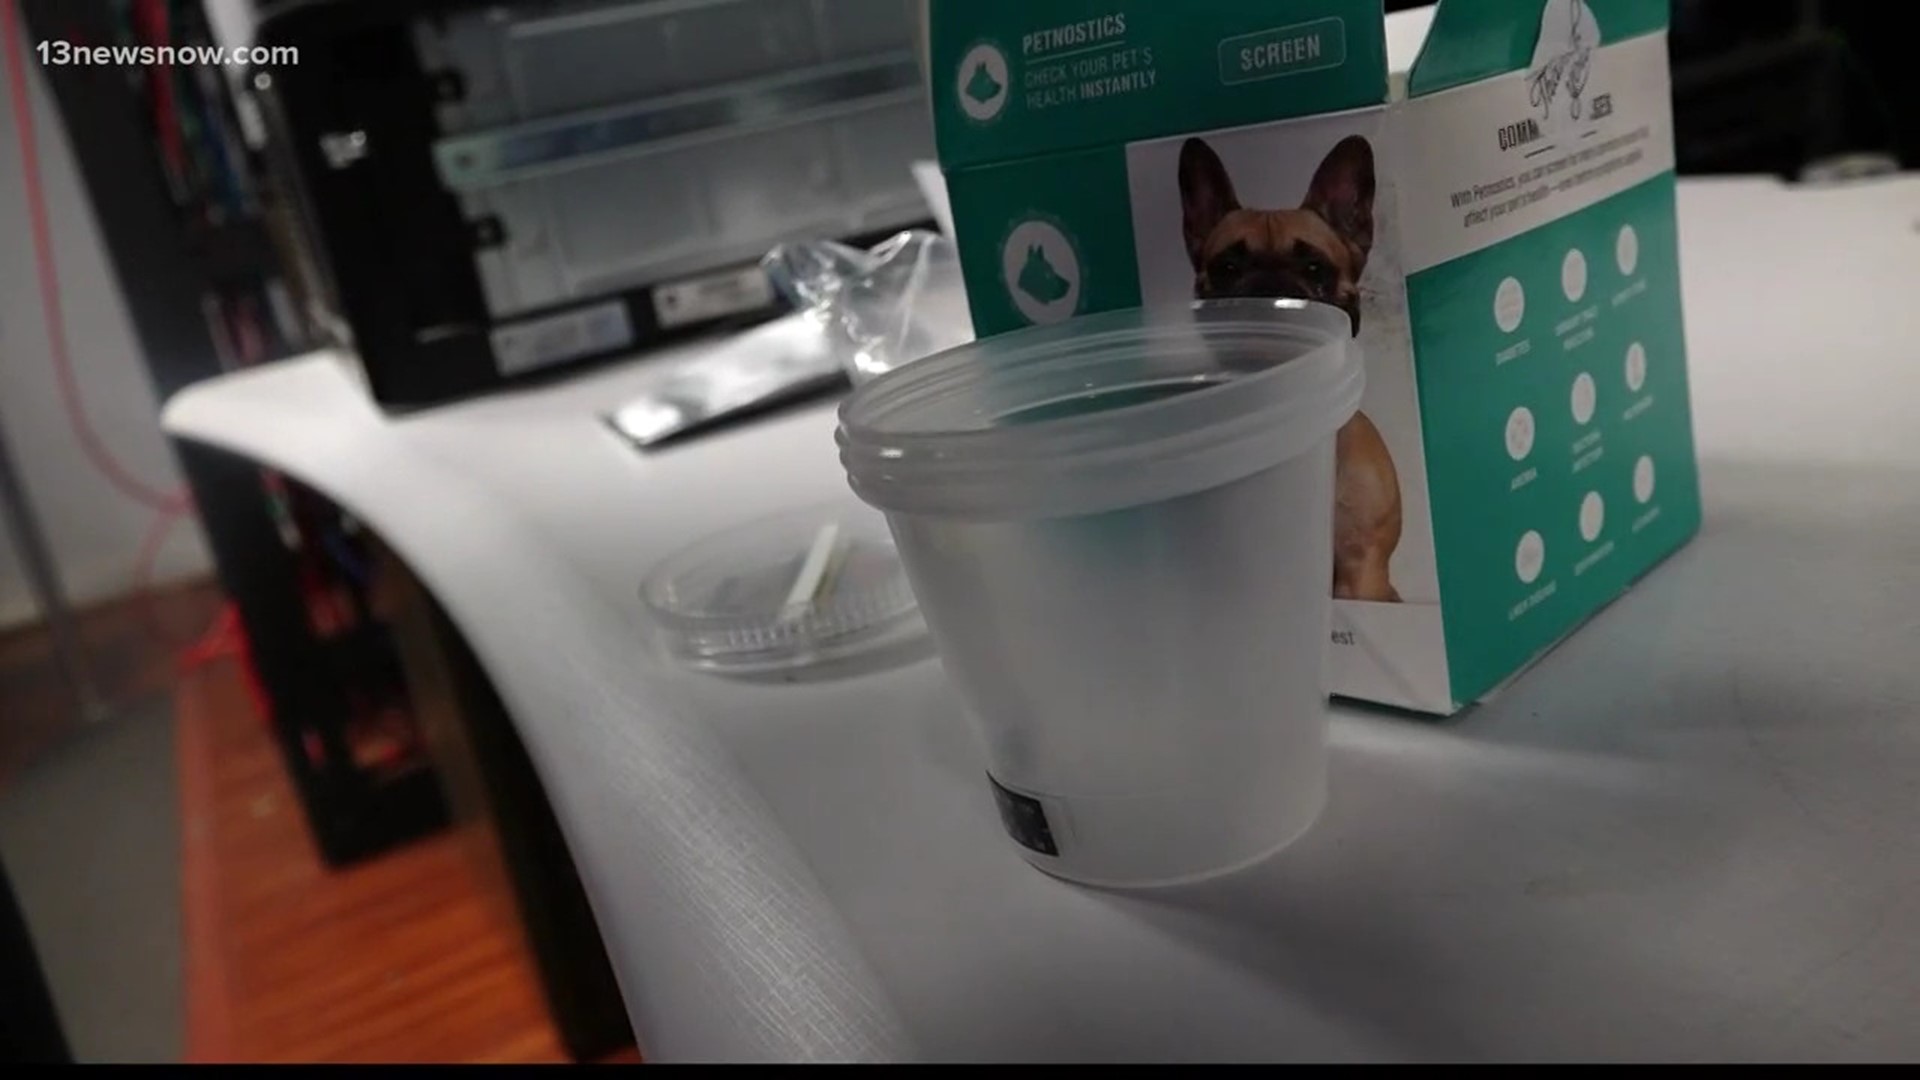 We've covered home DNA and medical test kits, but test kits for your pets are also growing in popularity.